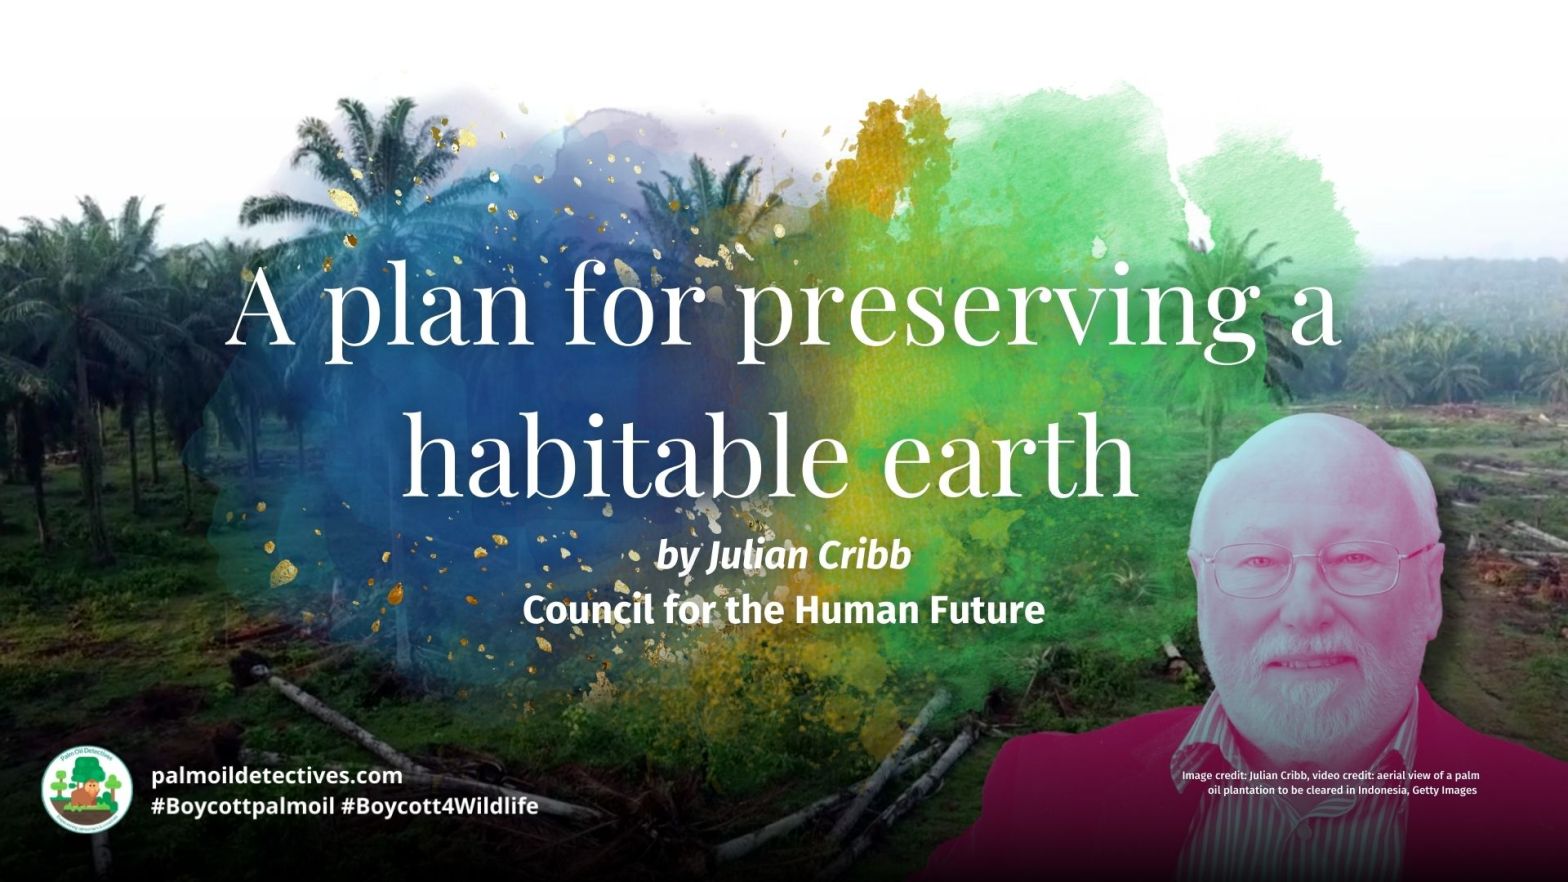 A plan for preserving a habitable earth by Julian Cribb